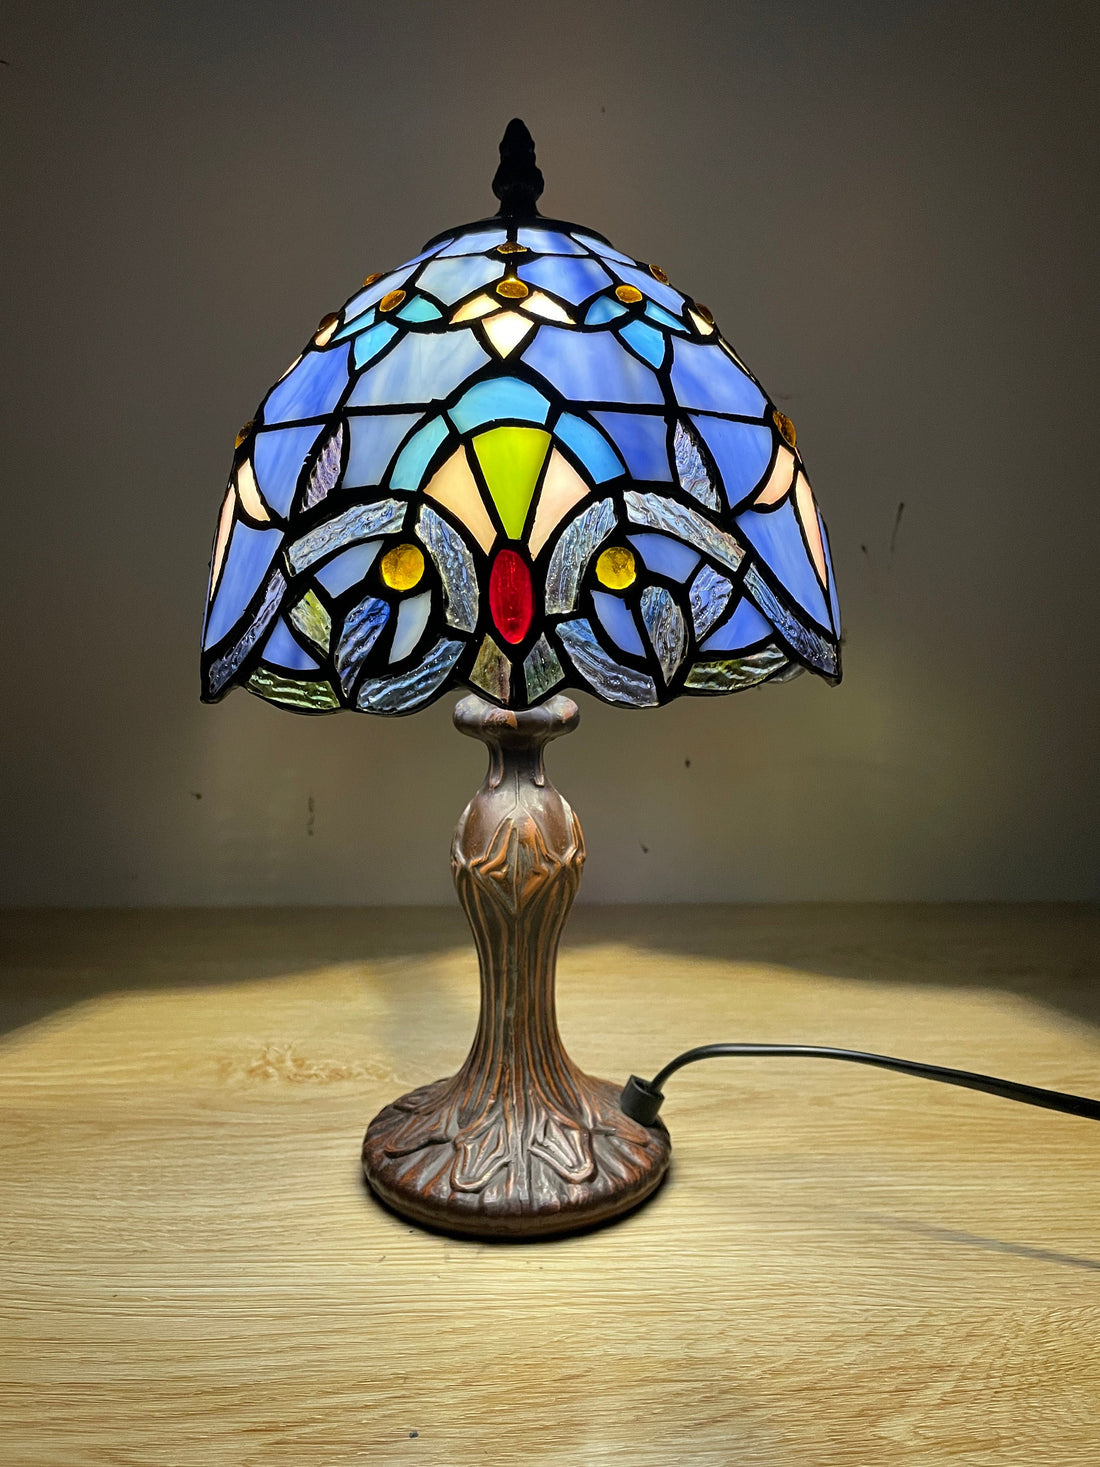 Crown Purple Violet Tiffany Lamp, Leadglass Stained Glass Shade, Crystal Bead Lamp Shade, Antique, Stained Glass Lamp Shade, Bedside Lamp